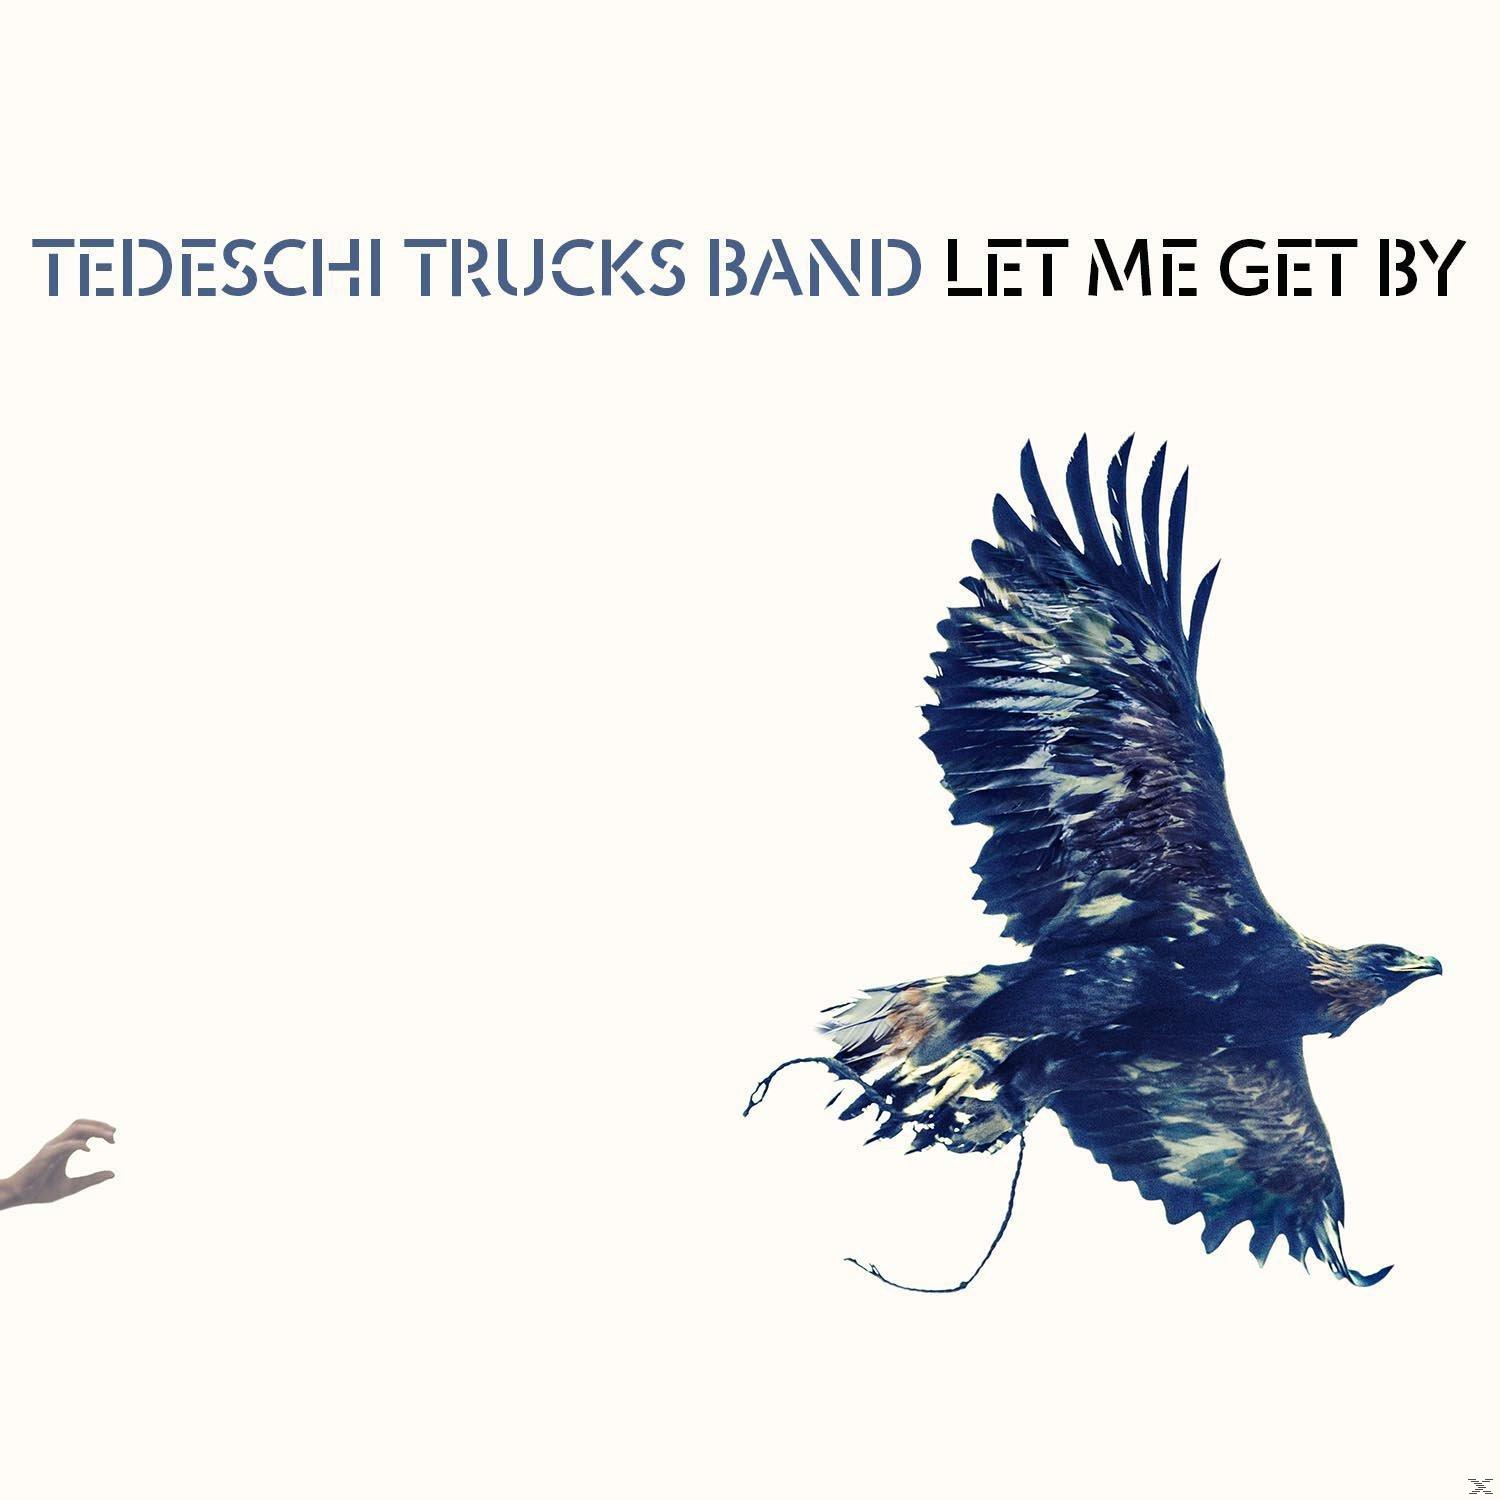 - (CD) Tedeschi Me By - Get Band Let Trucks